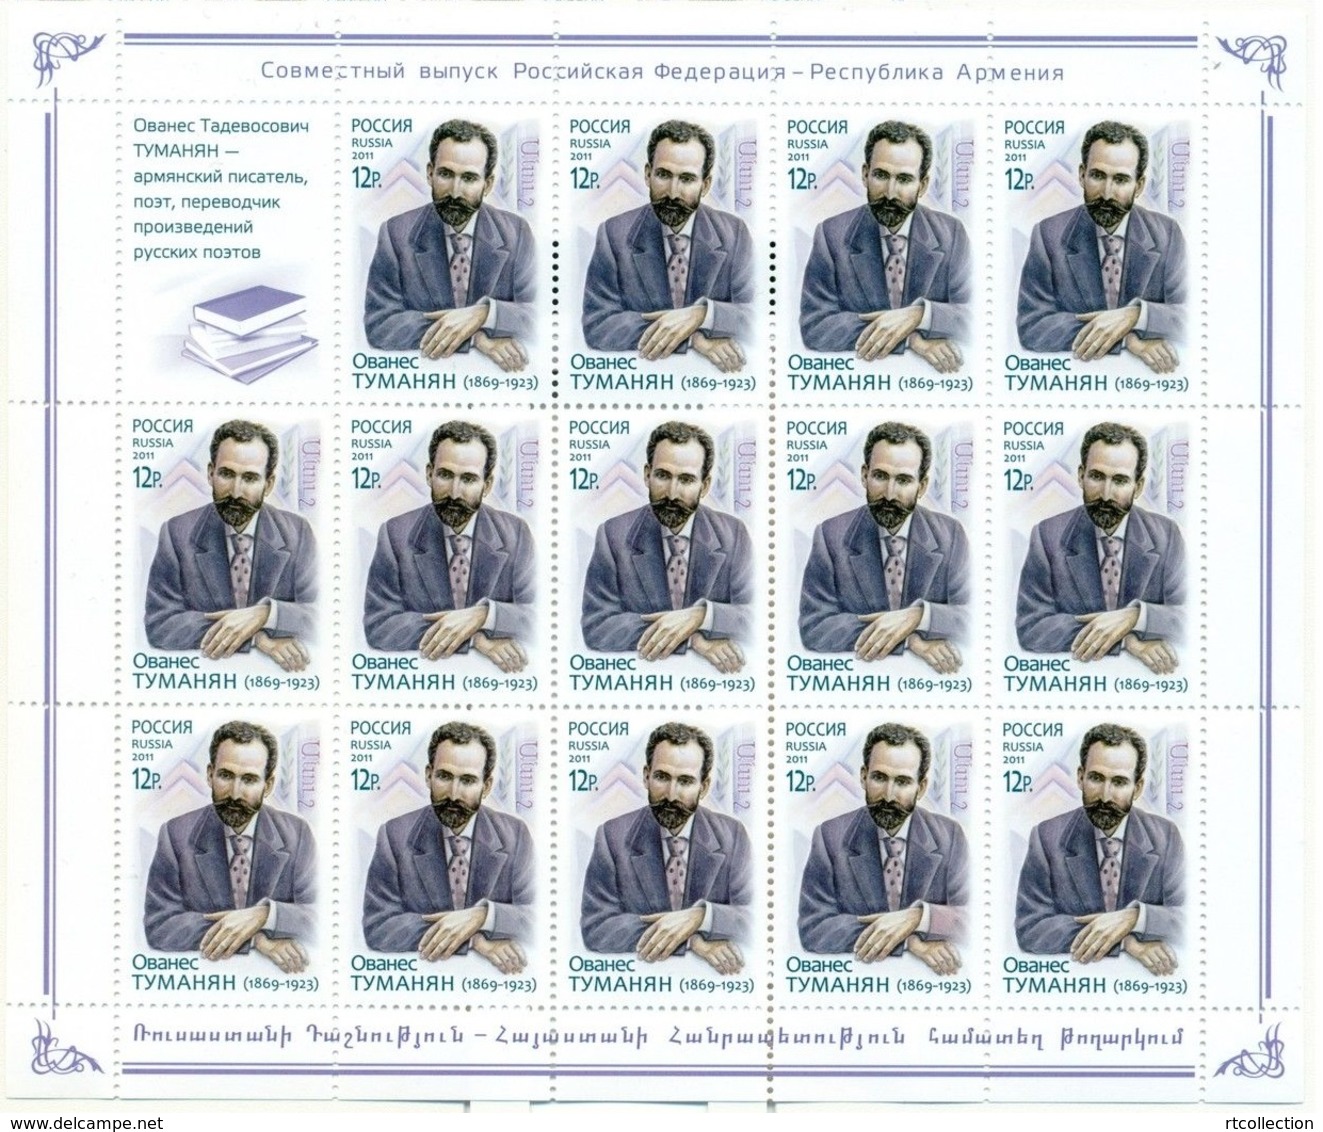 Russia 2011 Sheet Personalities Joint Issue With Armenia Famous People Ovanes Tumanian Writer 1869-1935 Stamps MNH - Hojas Completas